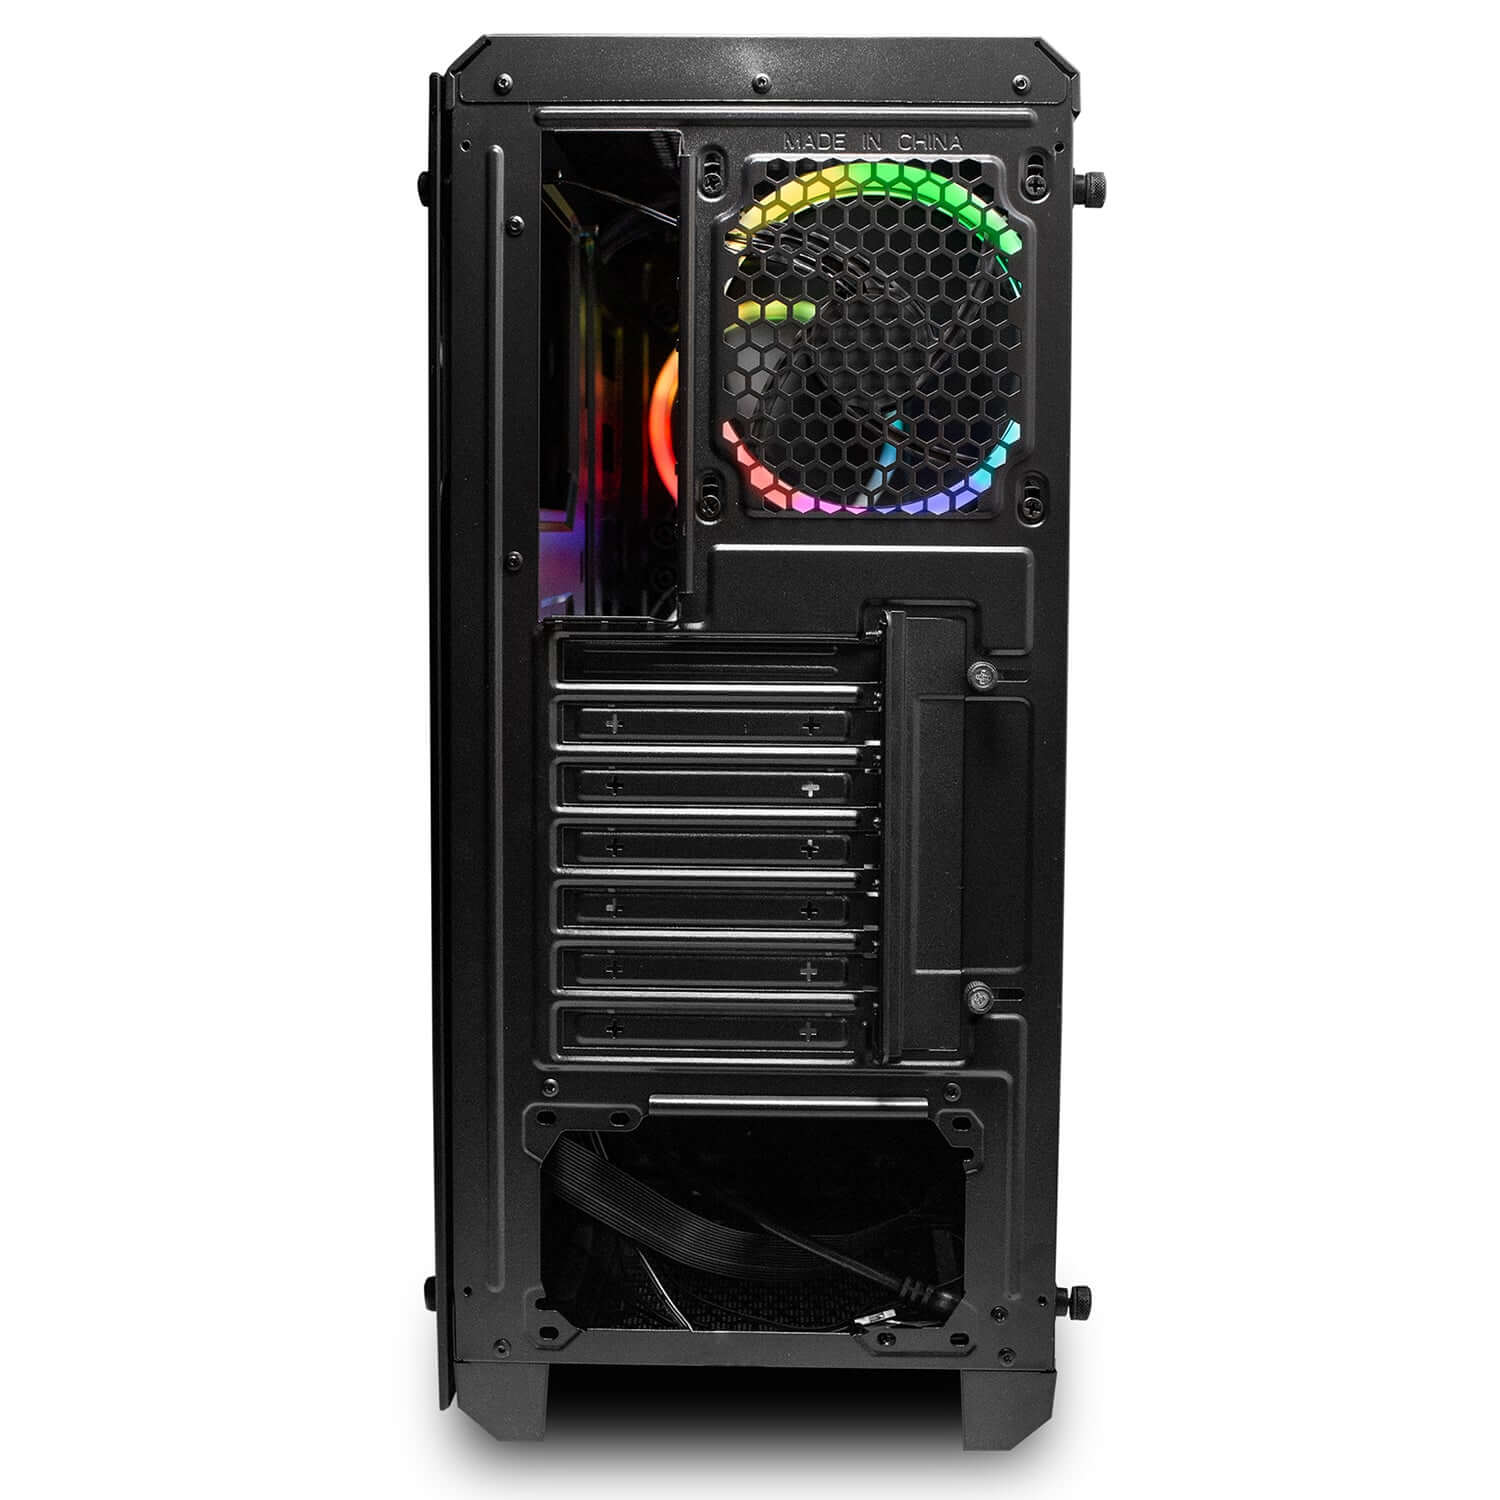 Deco Gear Mid-Tower PC Gaming Computer Case 3-Sided Tempered Glass and LED Lighting - Mini-ITX, Micro-ATX, ATX - Includes 4 120mm Double Ring Fans w/ Expansion for More, 7 Expansion Slots, 4 Drives - DecoGear